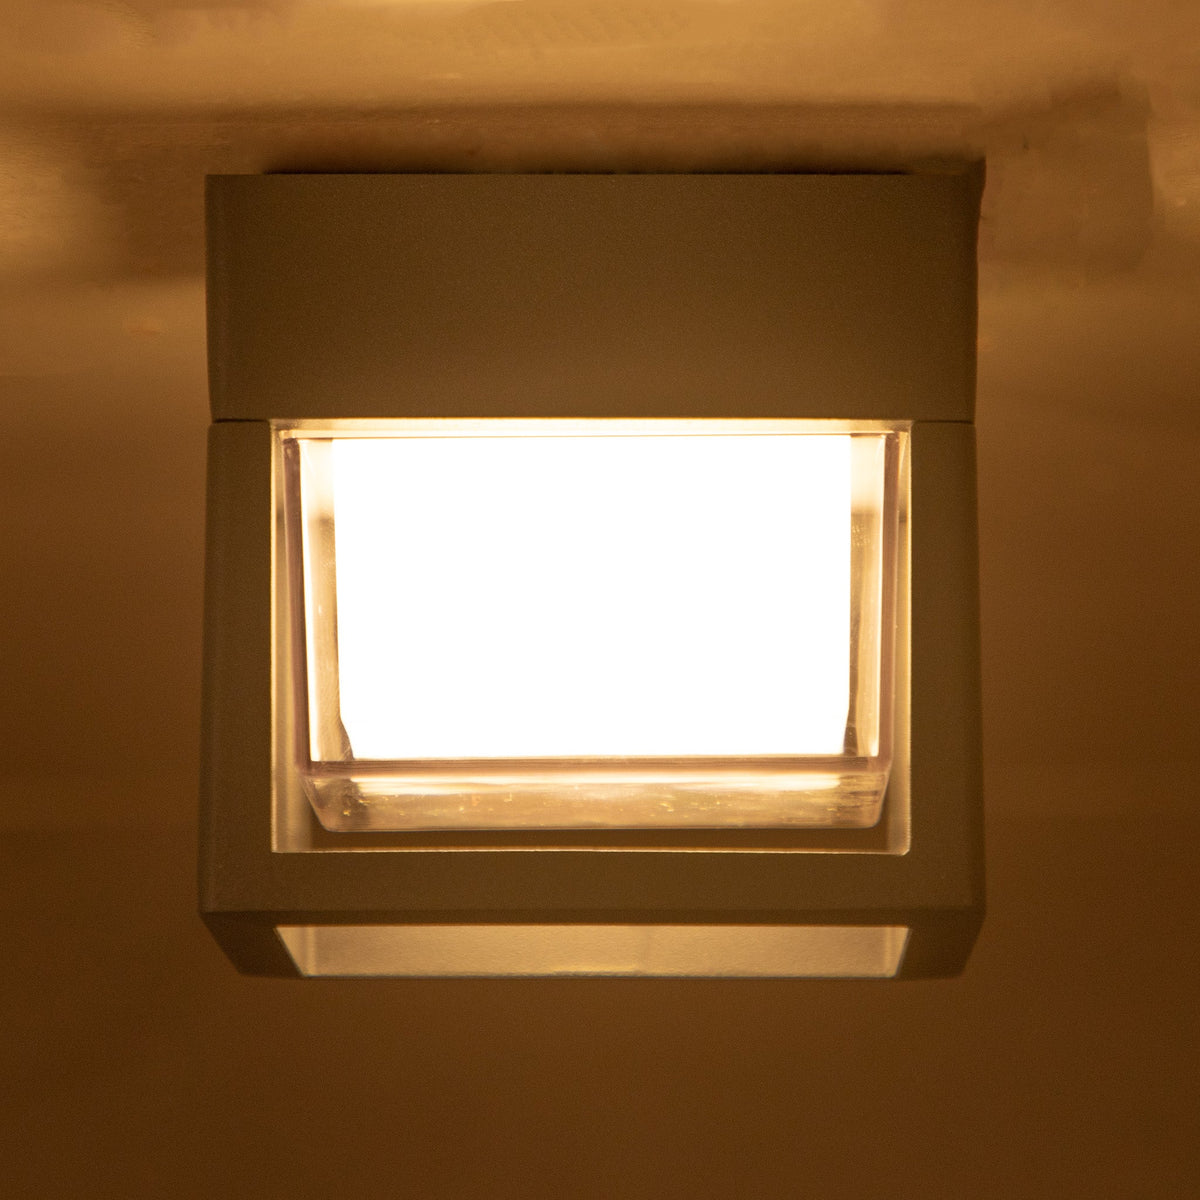 Buy United Square Outdoor LED Ceiling Light online